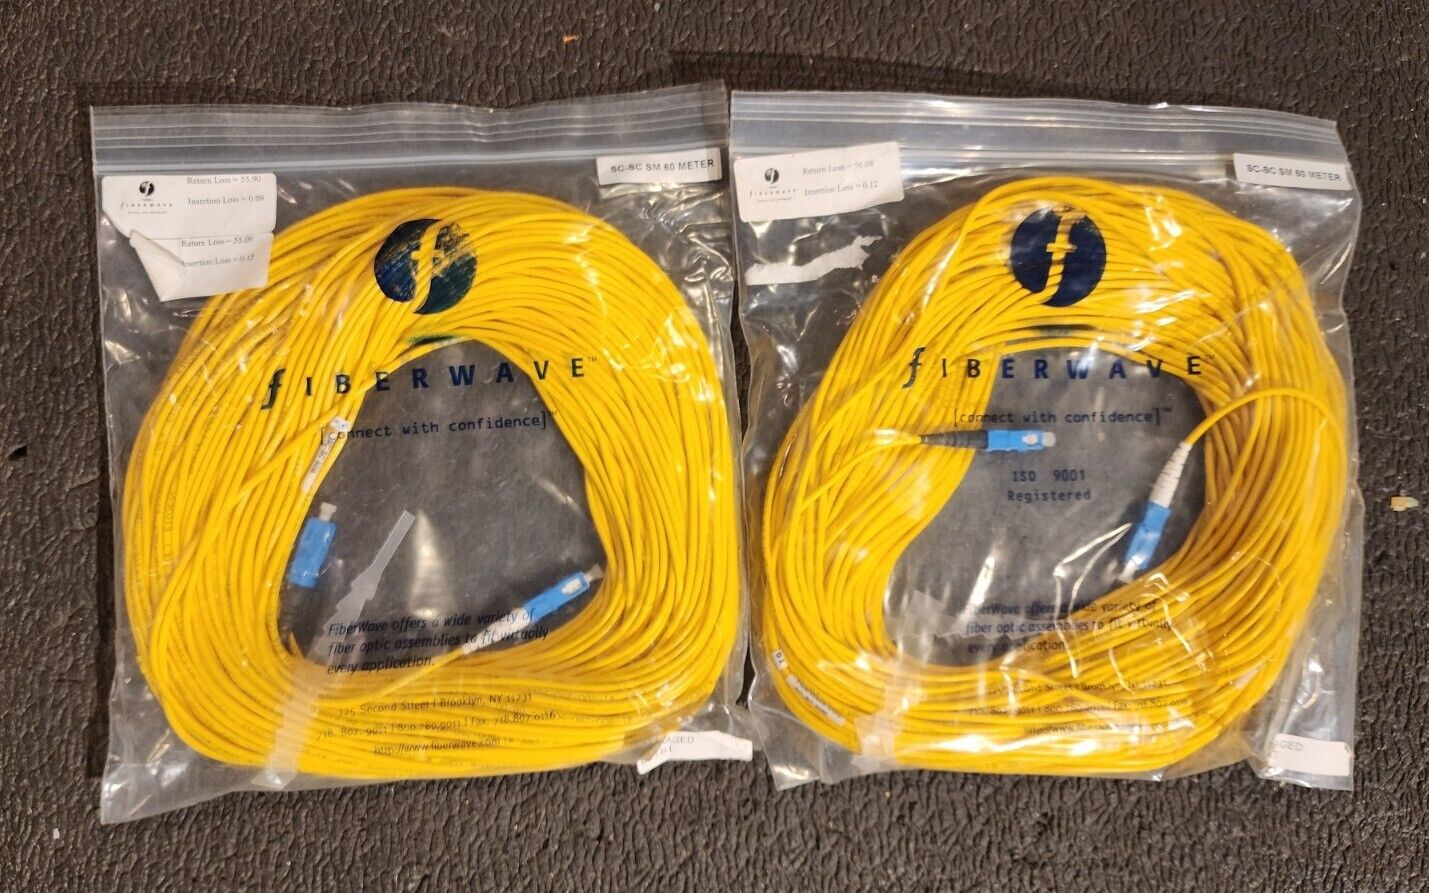 LOT OF 2 60 Meter SC-SC Single Mode Fiber Optic Network Cable New A++